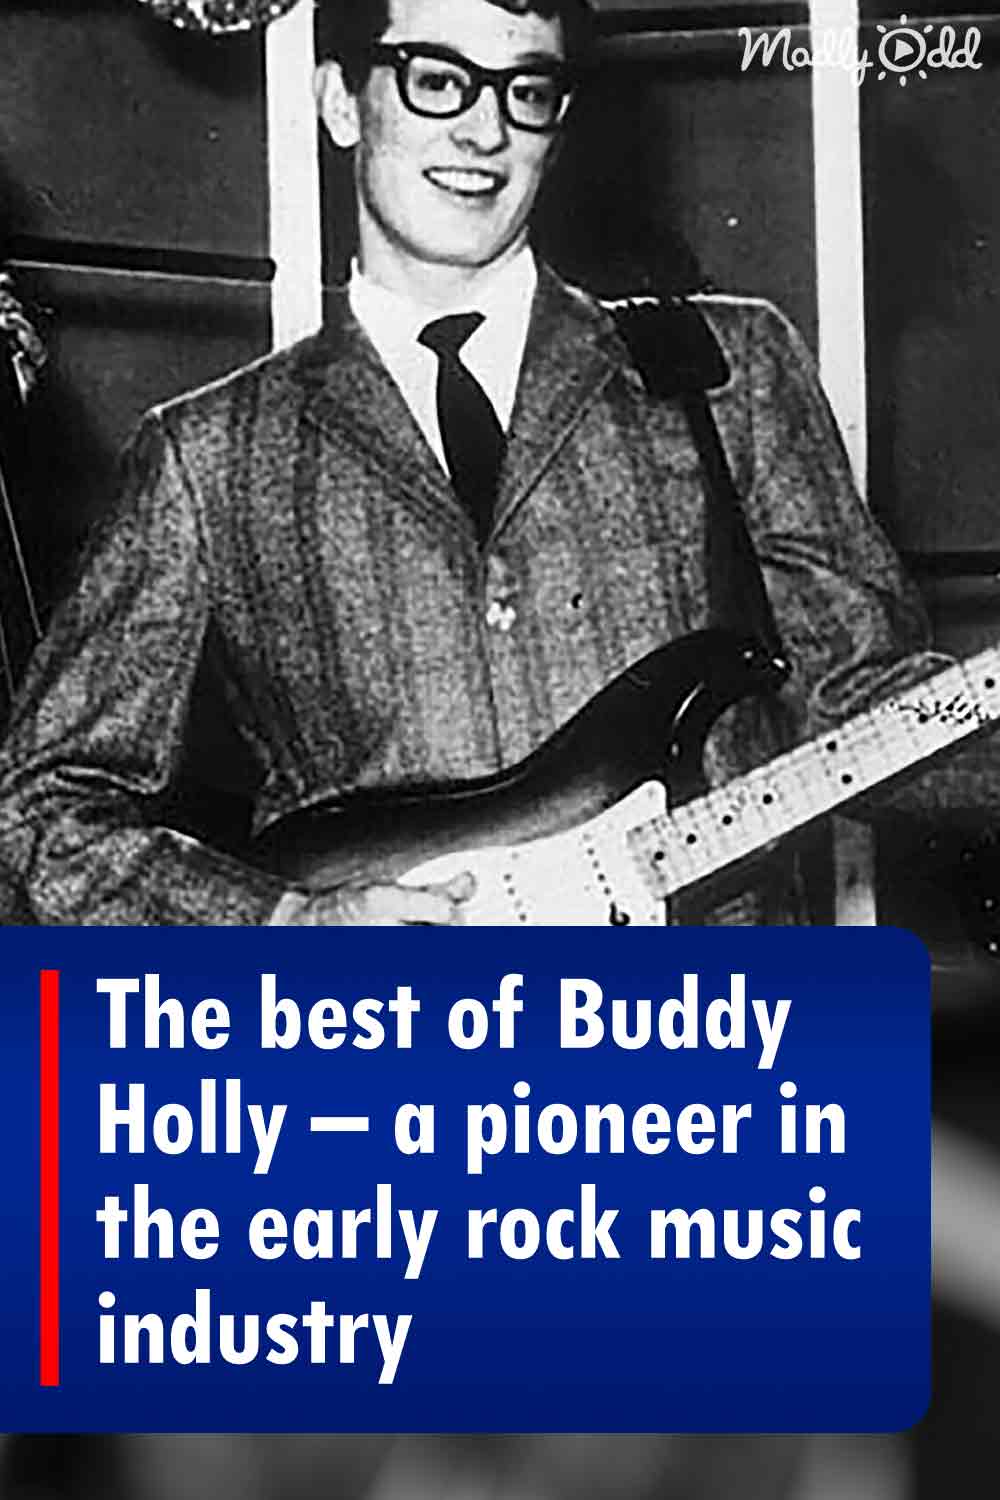 The best of Buddy Holly – a pioneer in the early rock music industry